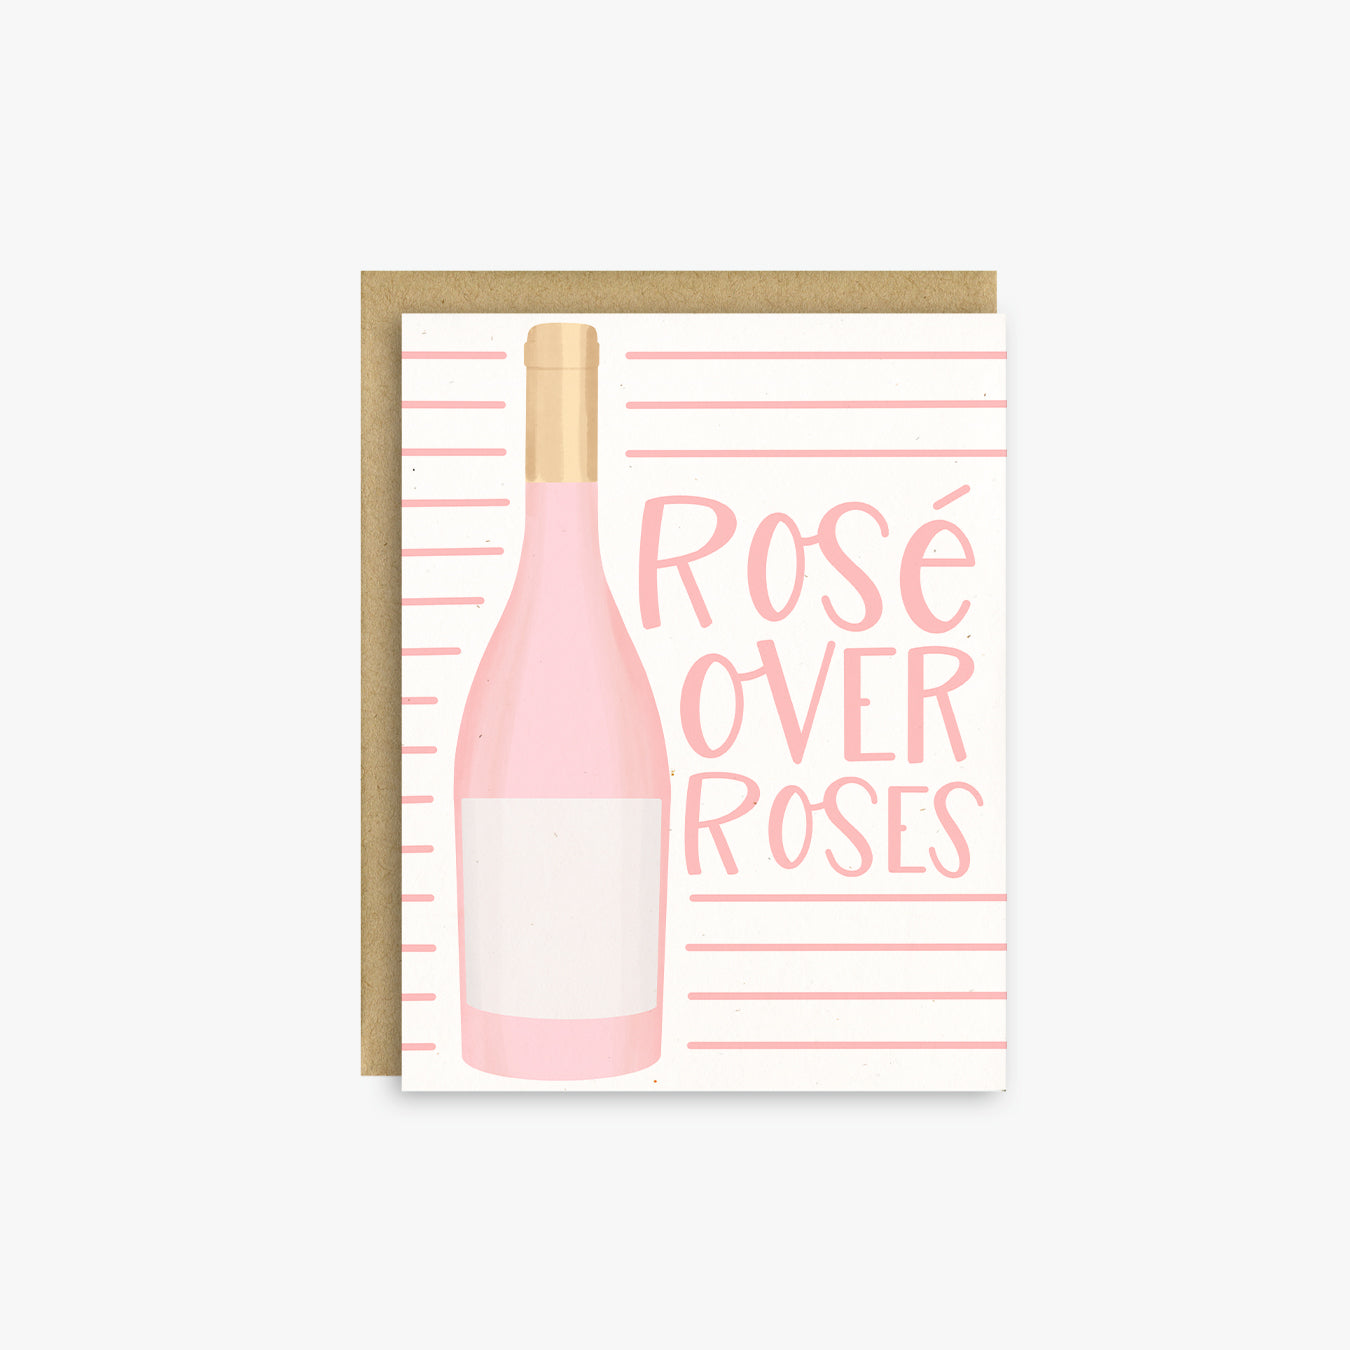 Rosé Over Roses Birthday Card, Galentine's Day Card